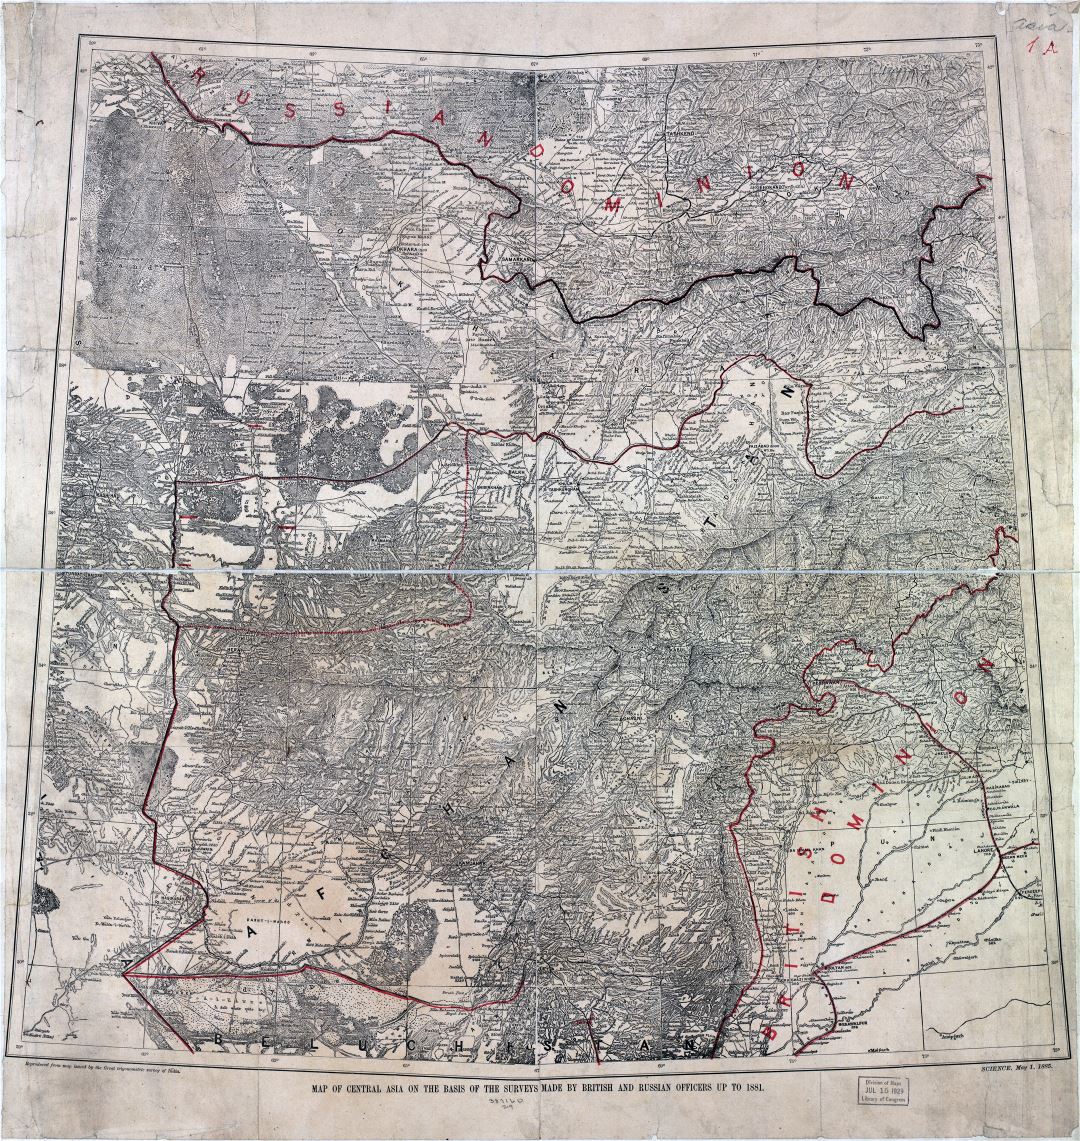 Large scale old map of Central Asia on the basis of the surveys made by British and Russian officers to 1881 - 1885